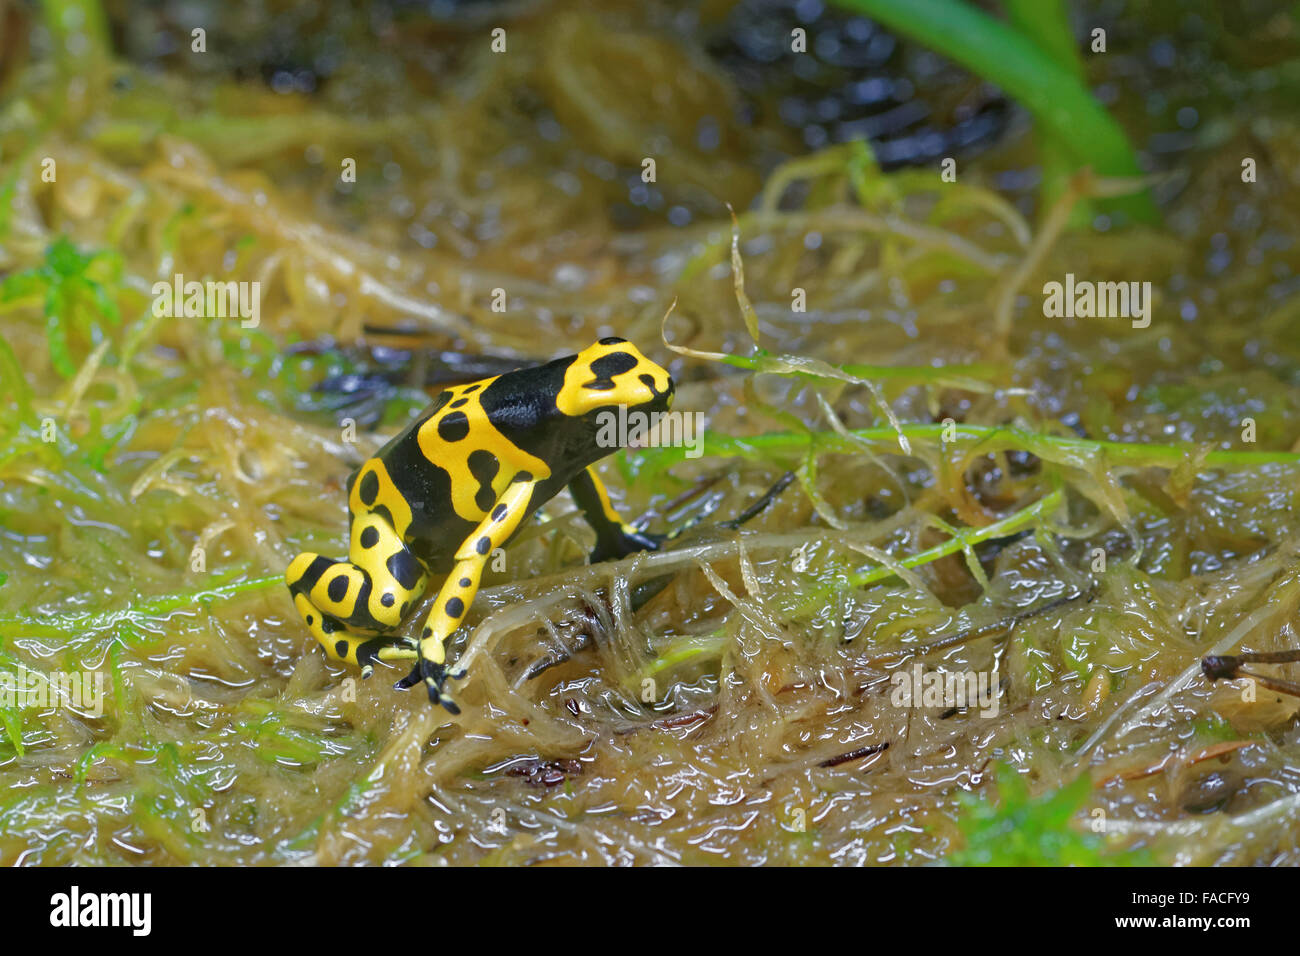 Yellow-banded poison dart frog (Dendrobates leucomelas), also known as yellow-headed poison dart frog or bumblebee poison frog, Stock Photo